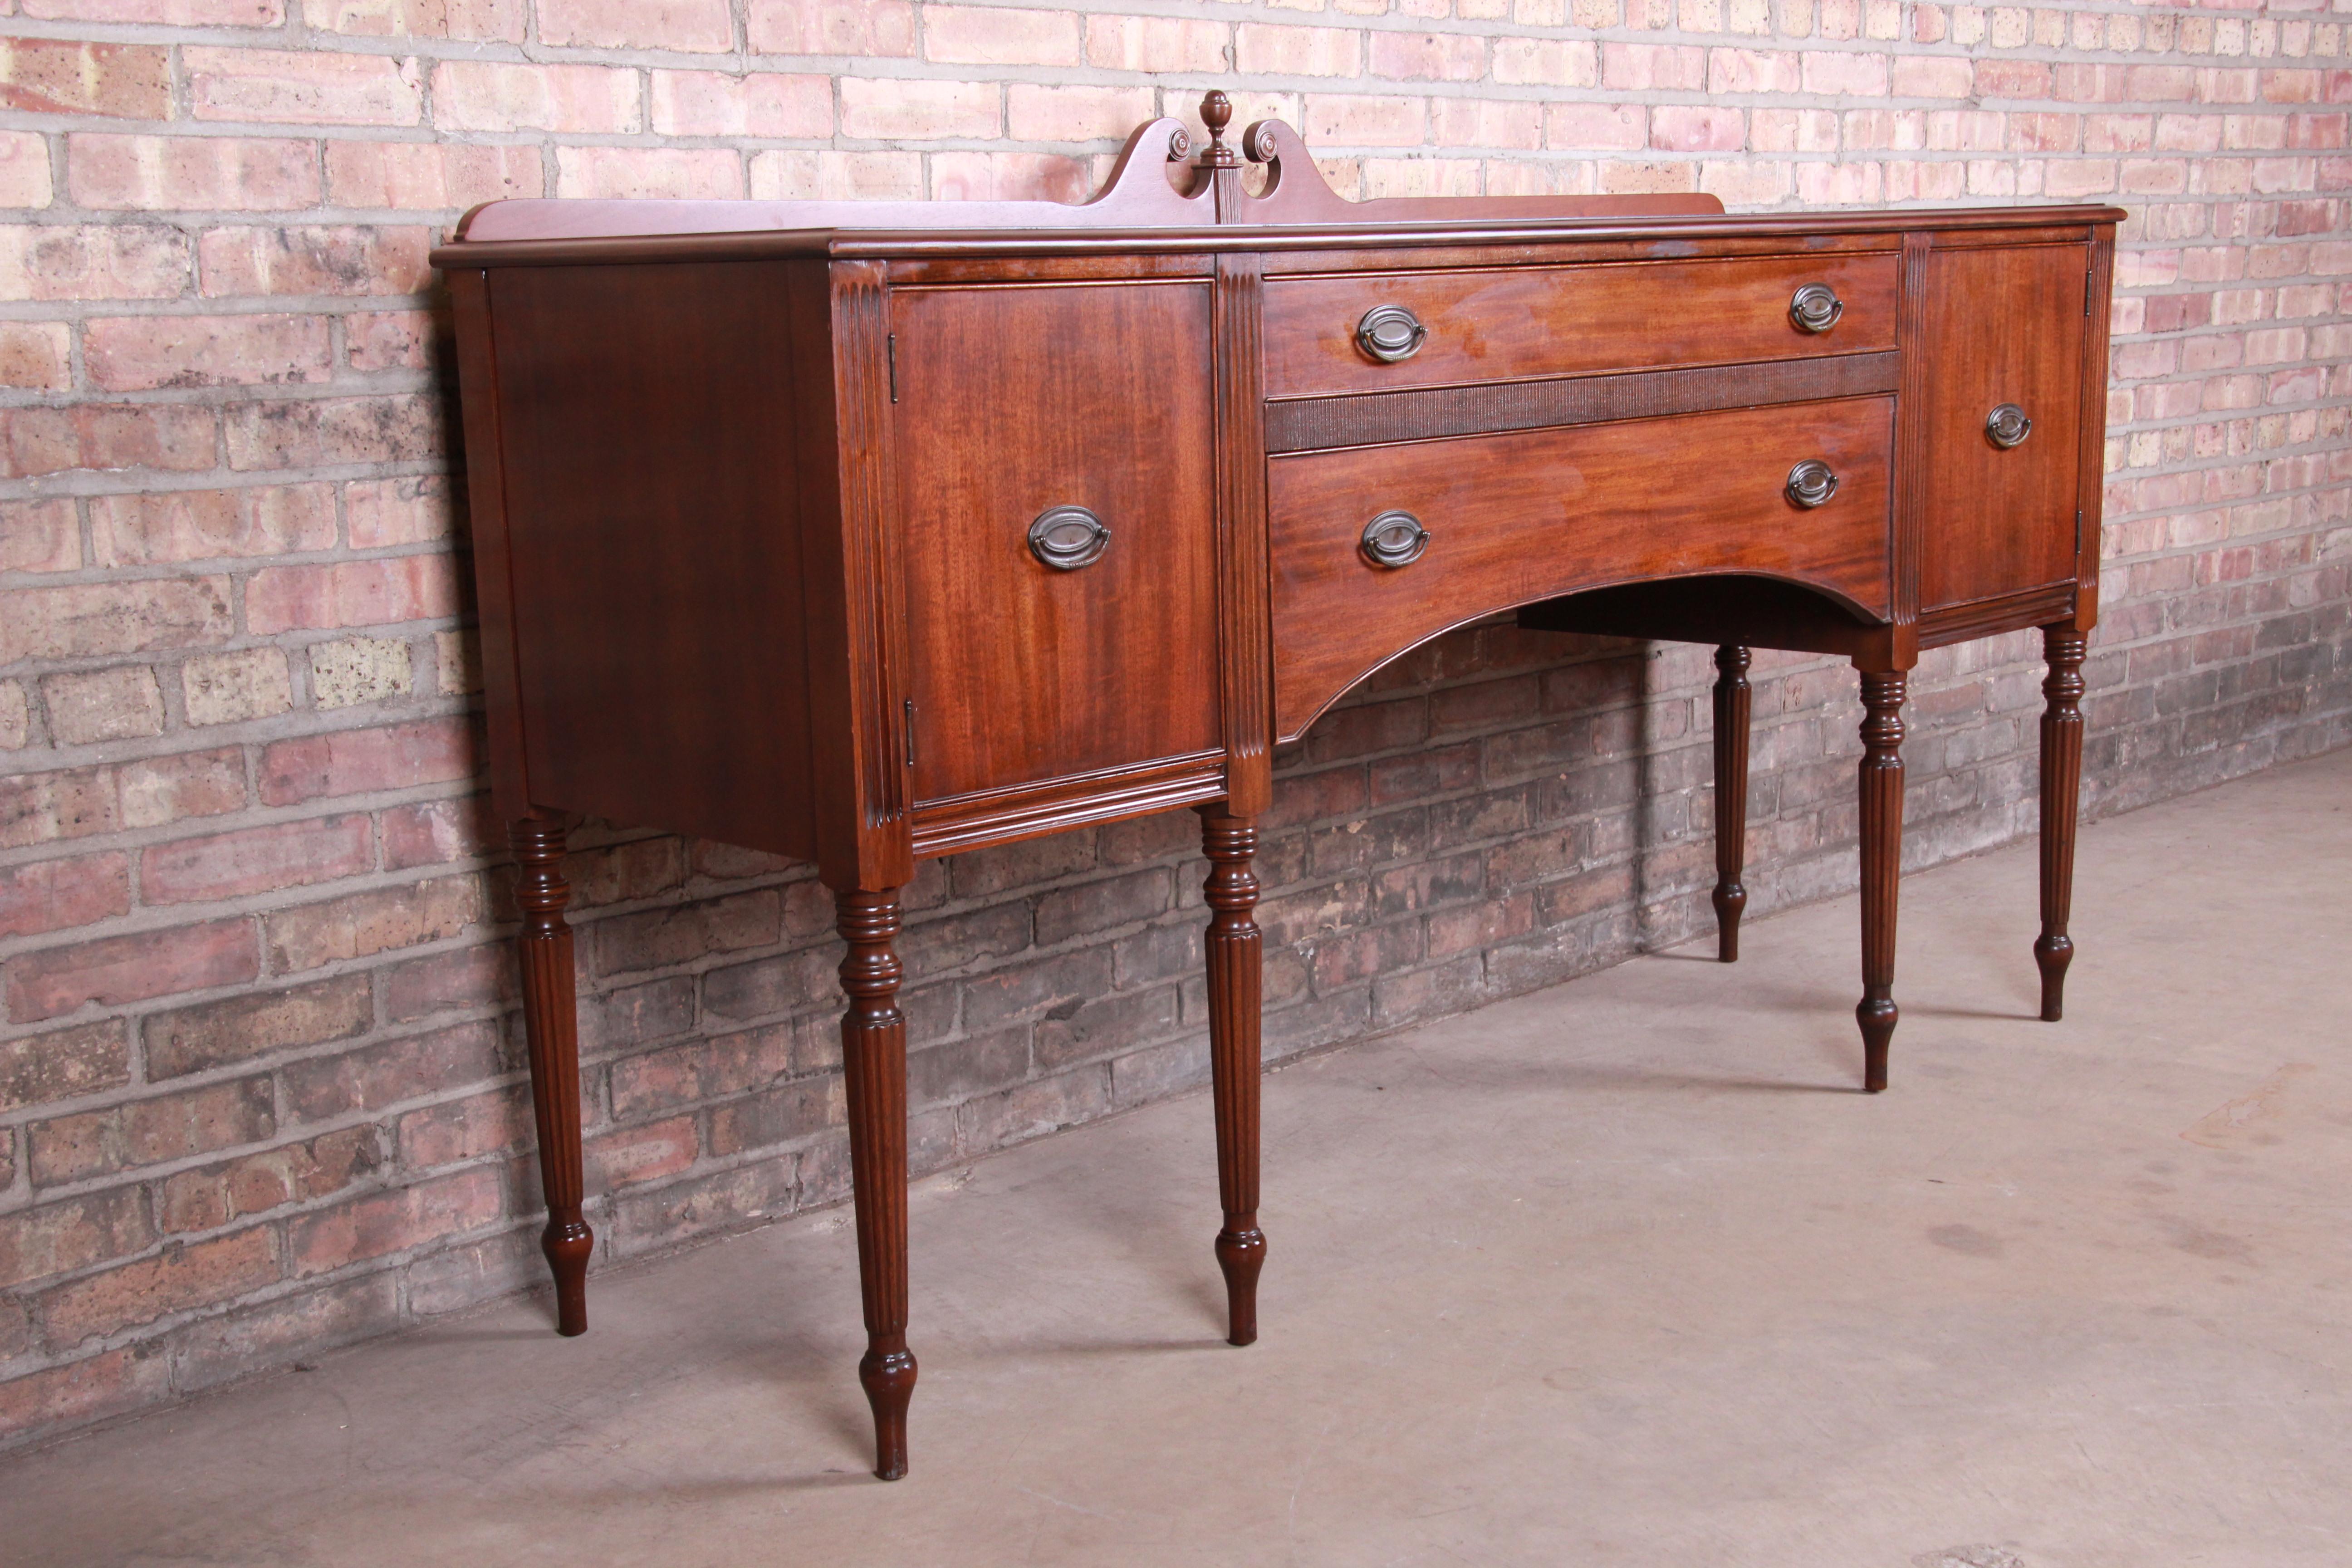 20th Century Early Baker Furniture Mahogany Hepplewhite Sideboard Buffet, Newly Refinished